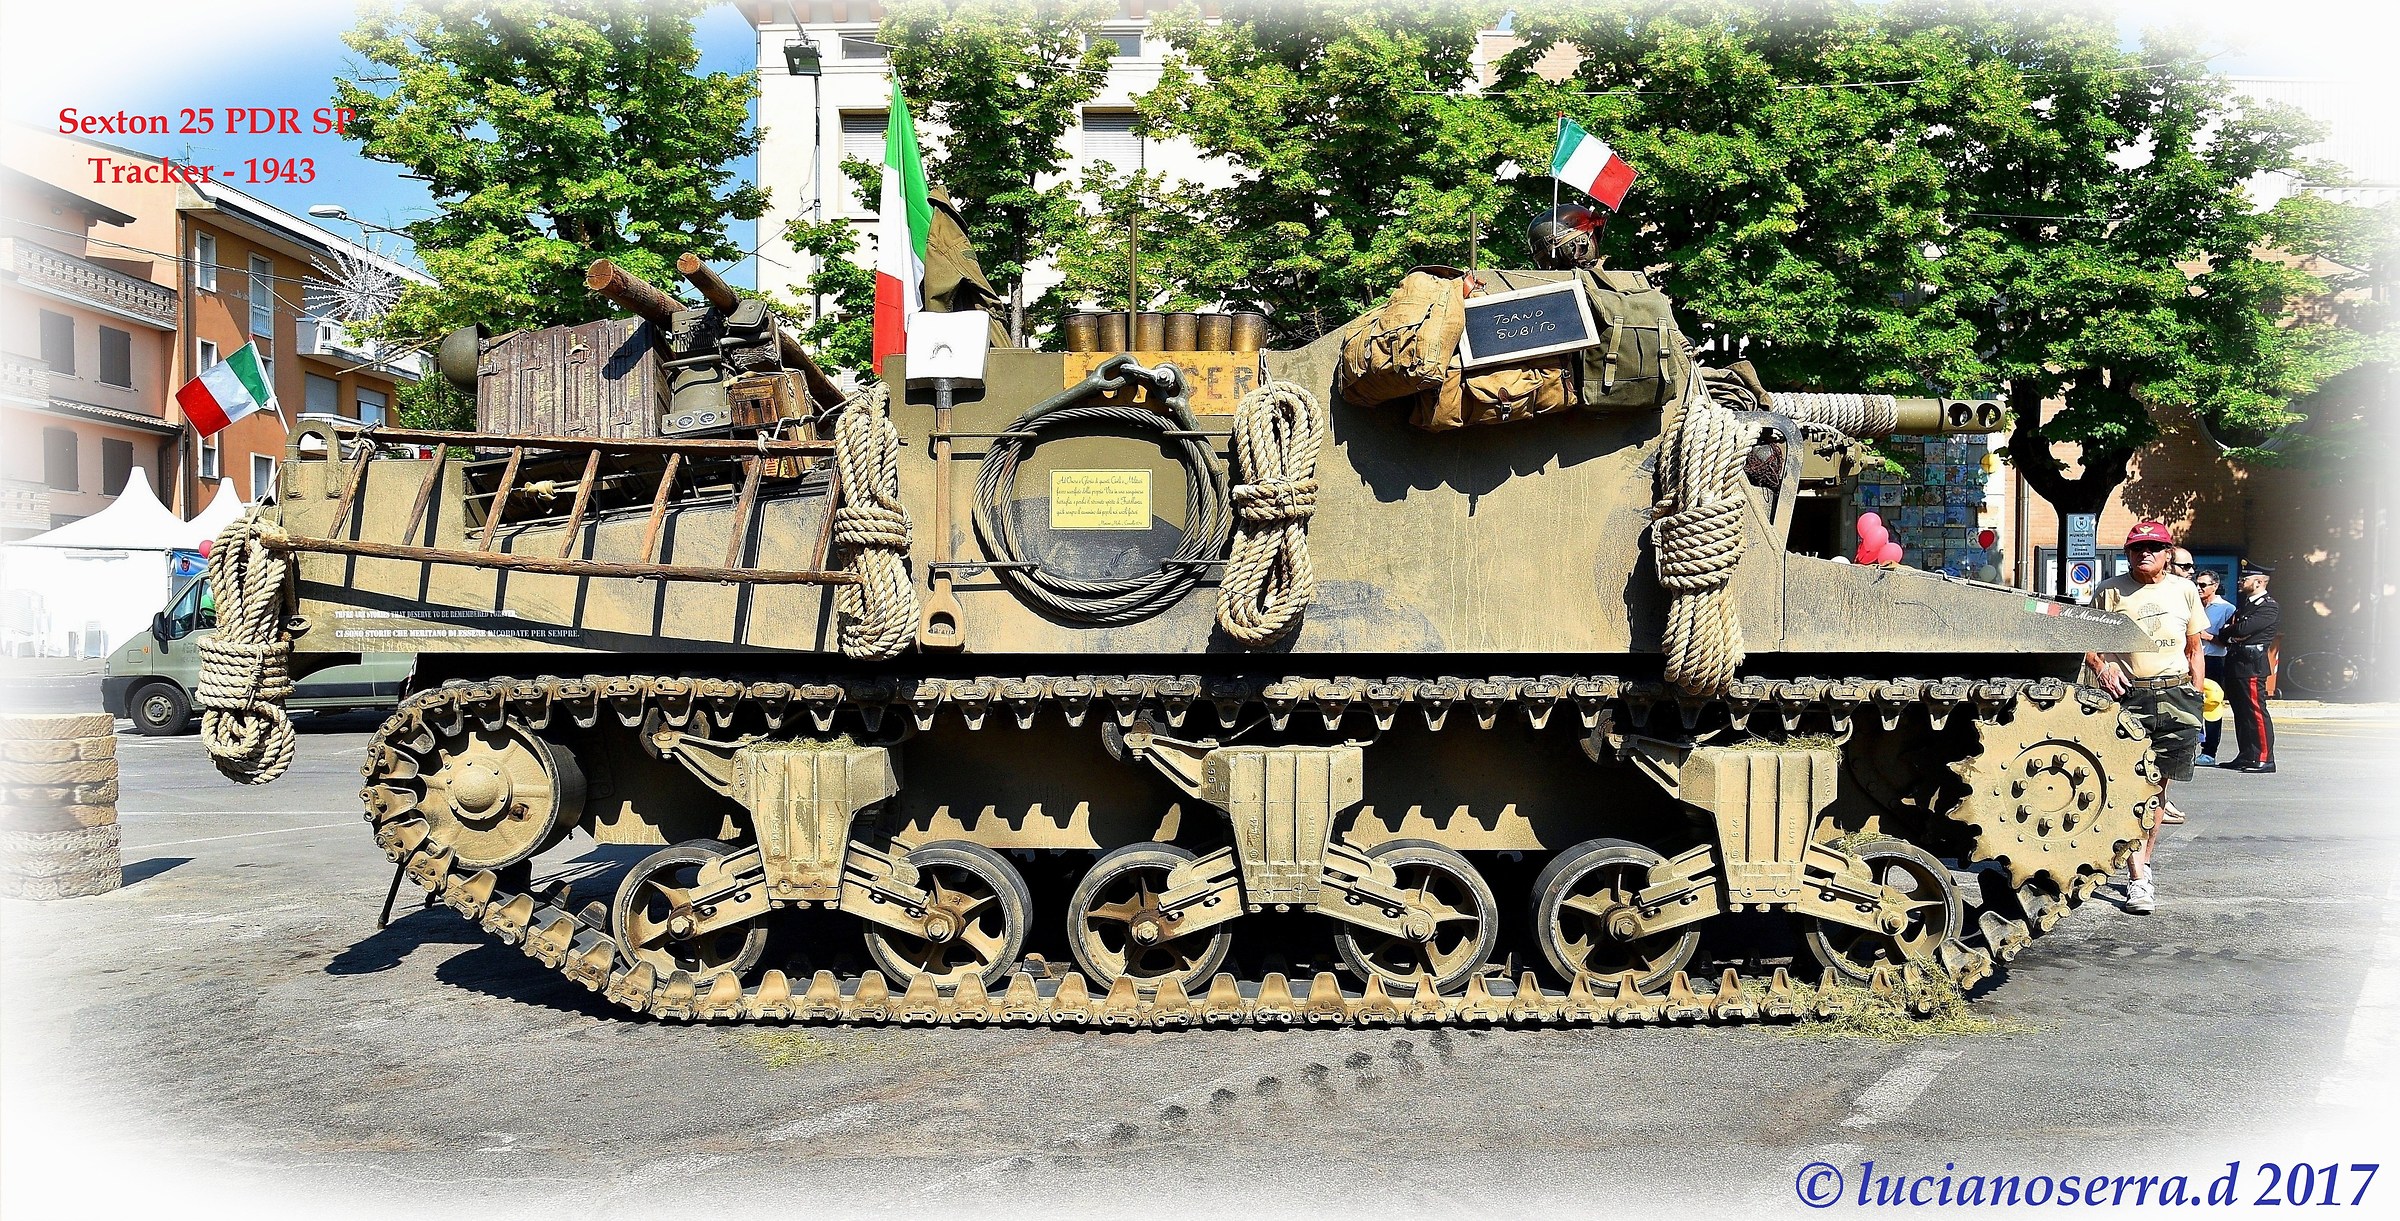 Sexton 25 PDR SP Tracked - 1943...